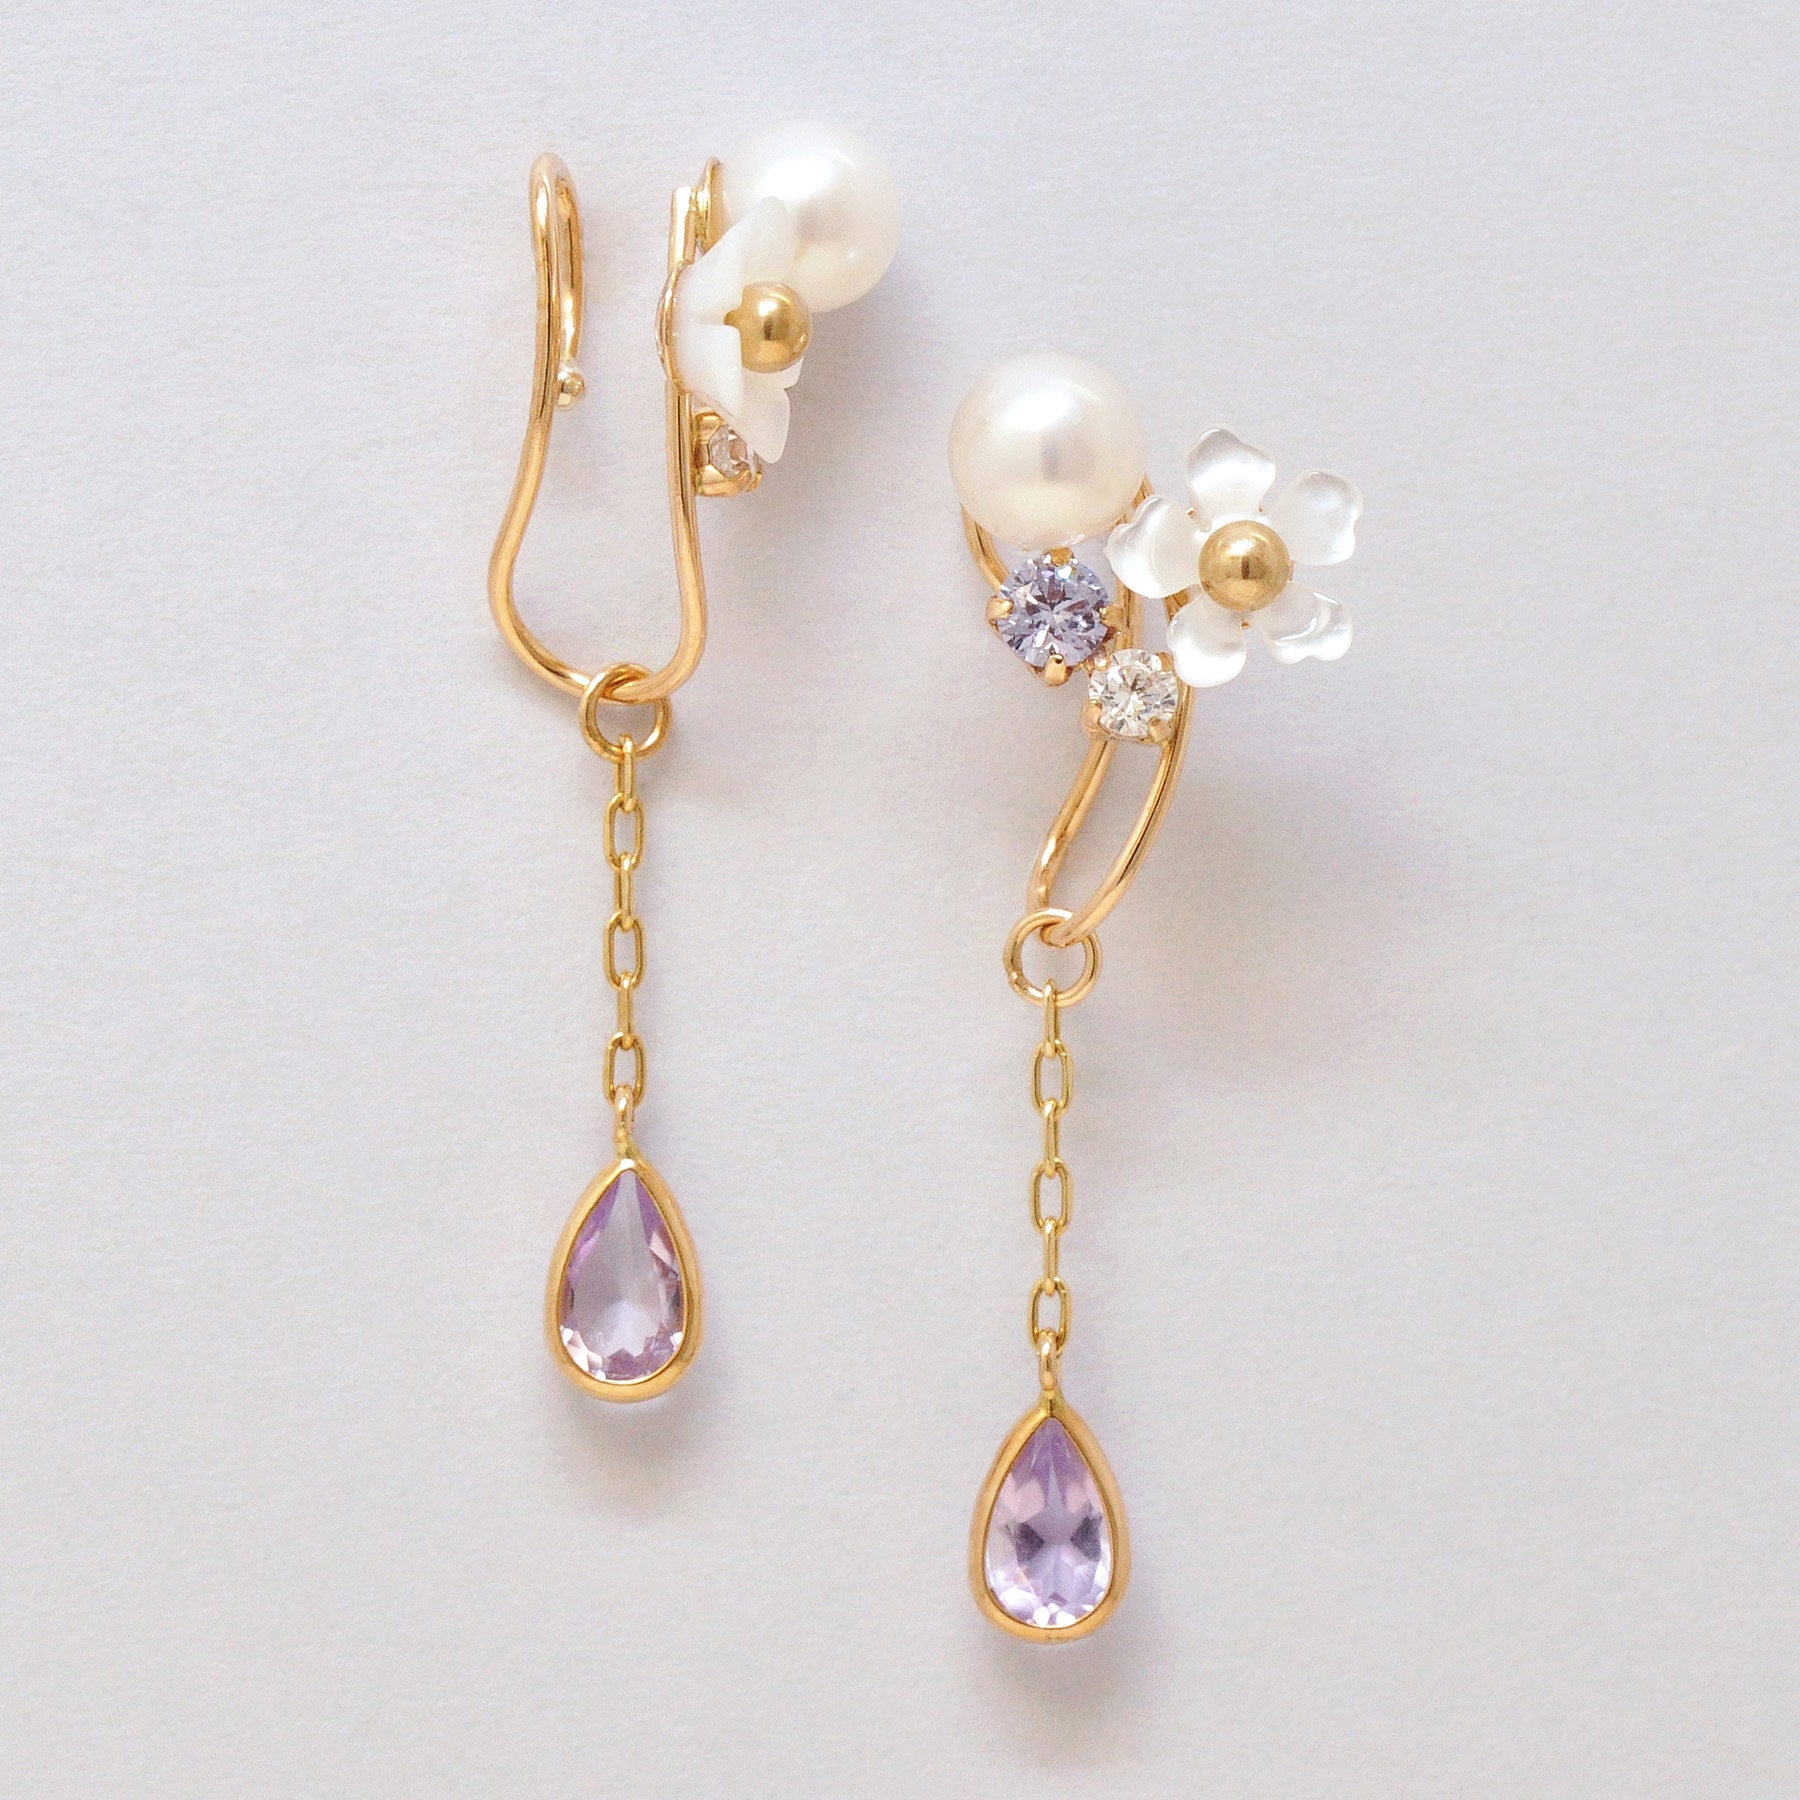 [Airy Clip-On Earrings] Cute Flower Earrings (10K Yellow Gold) - Product Image